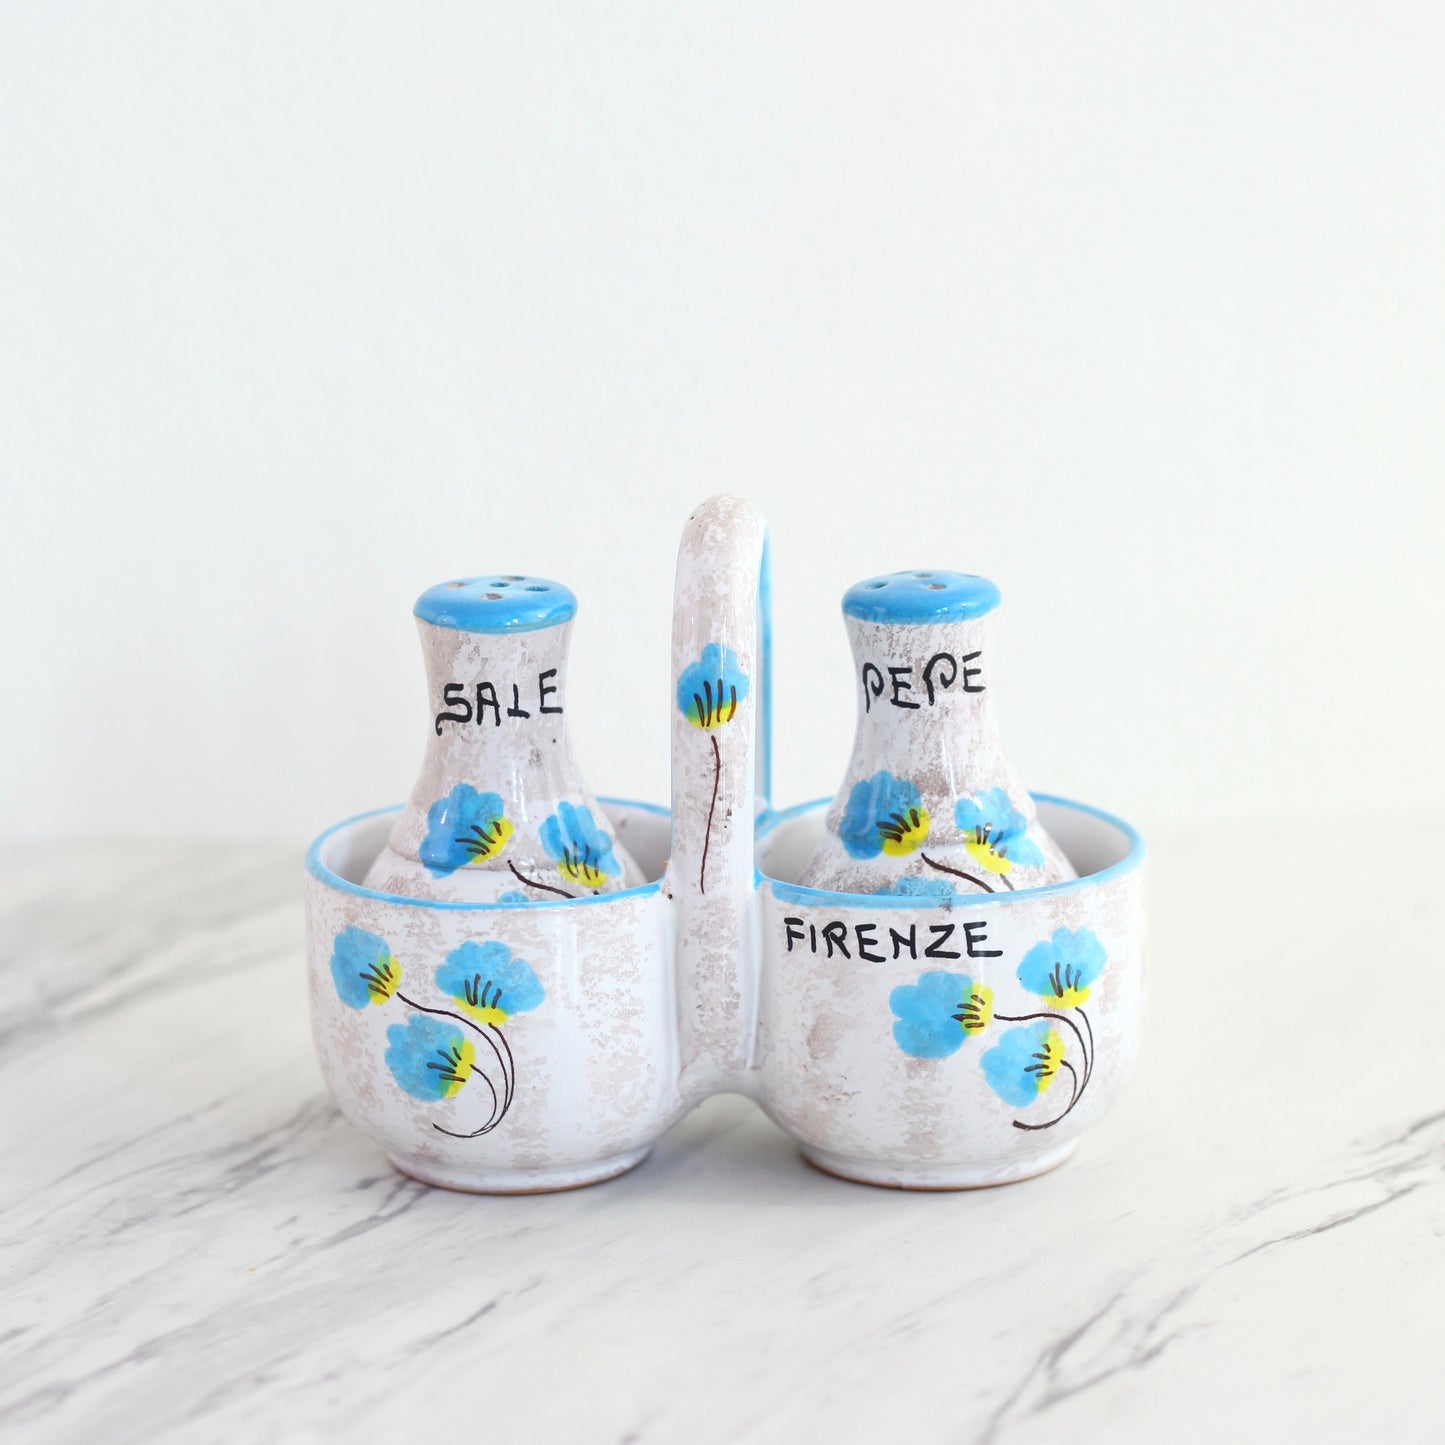 SOLD - Vintage Aqua & Yellow Salt & Pepper Shakers from Italy